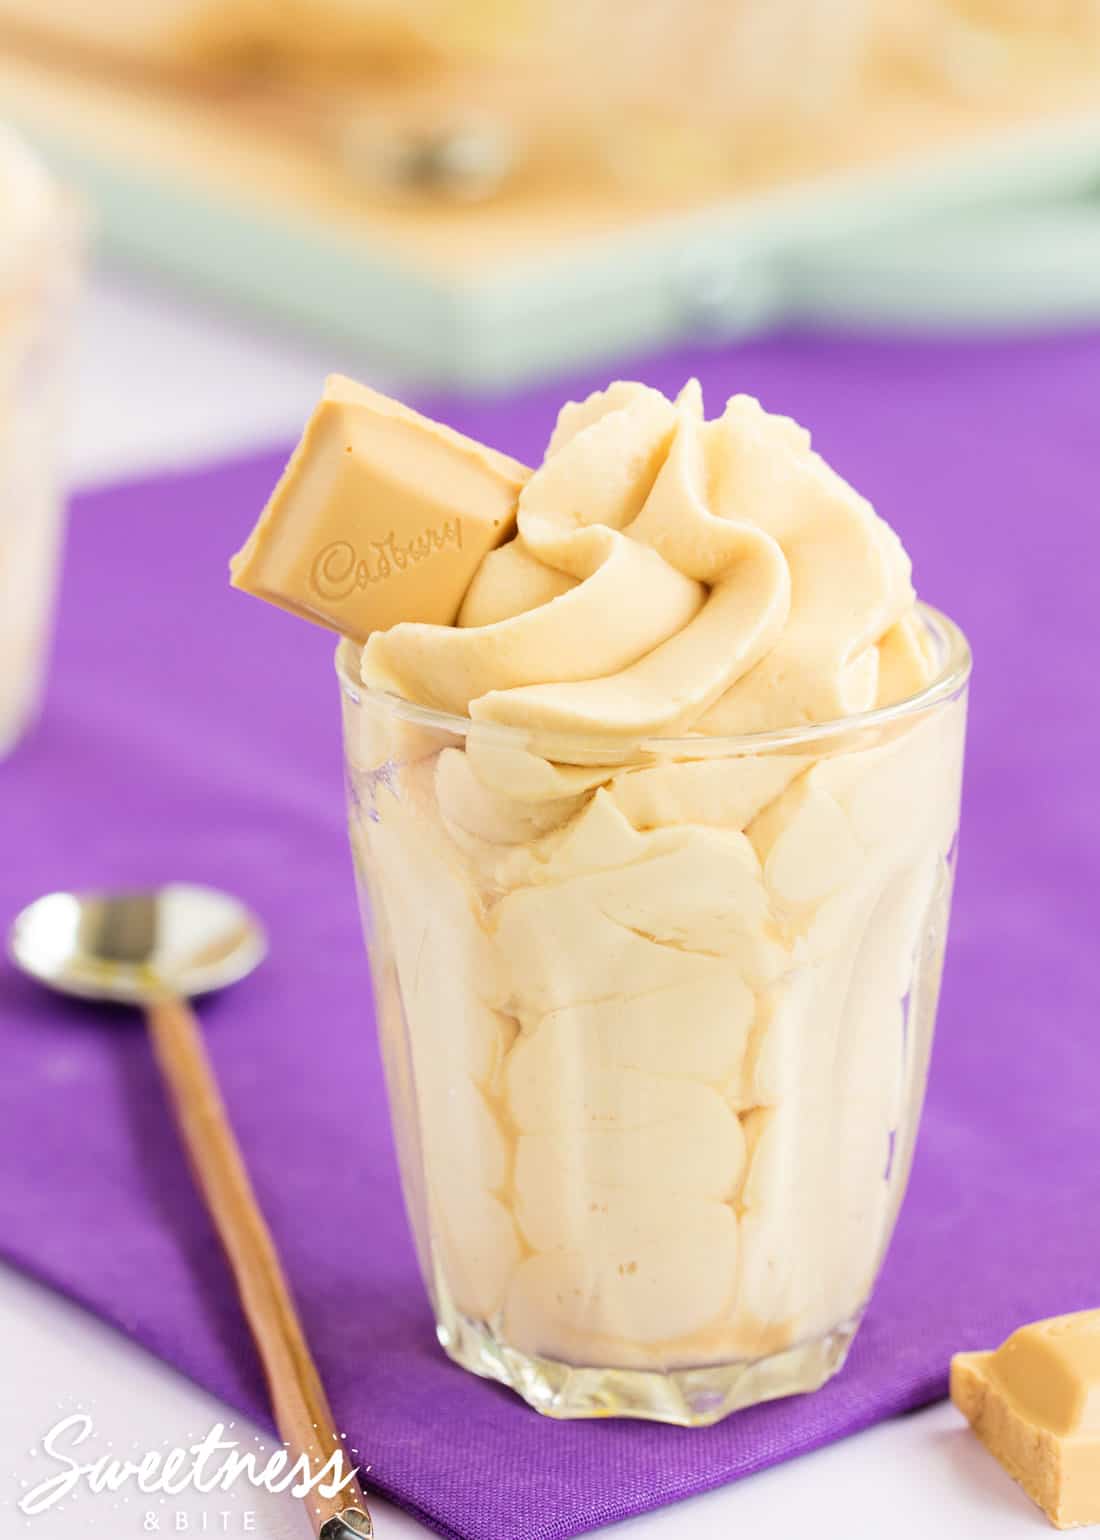 Easy Caramilk Mousse, piped in a swirl into a small glass with a square of Caramilk chocolate on top.